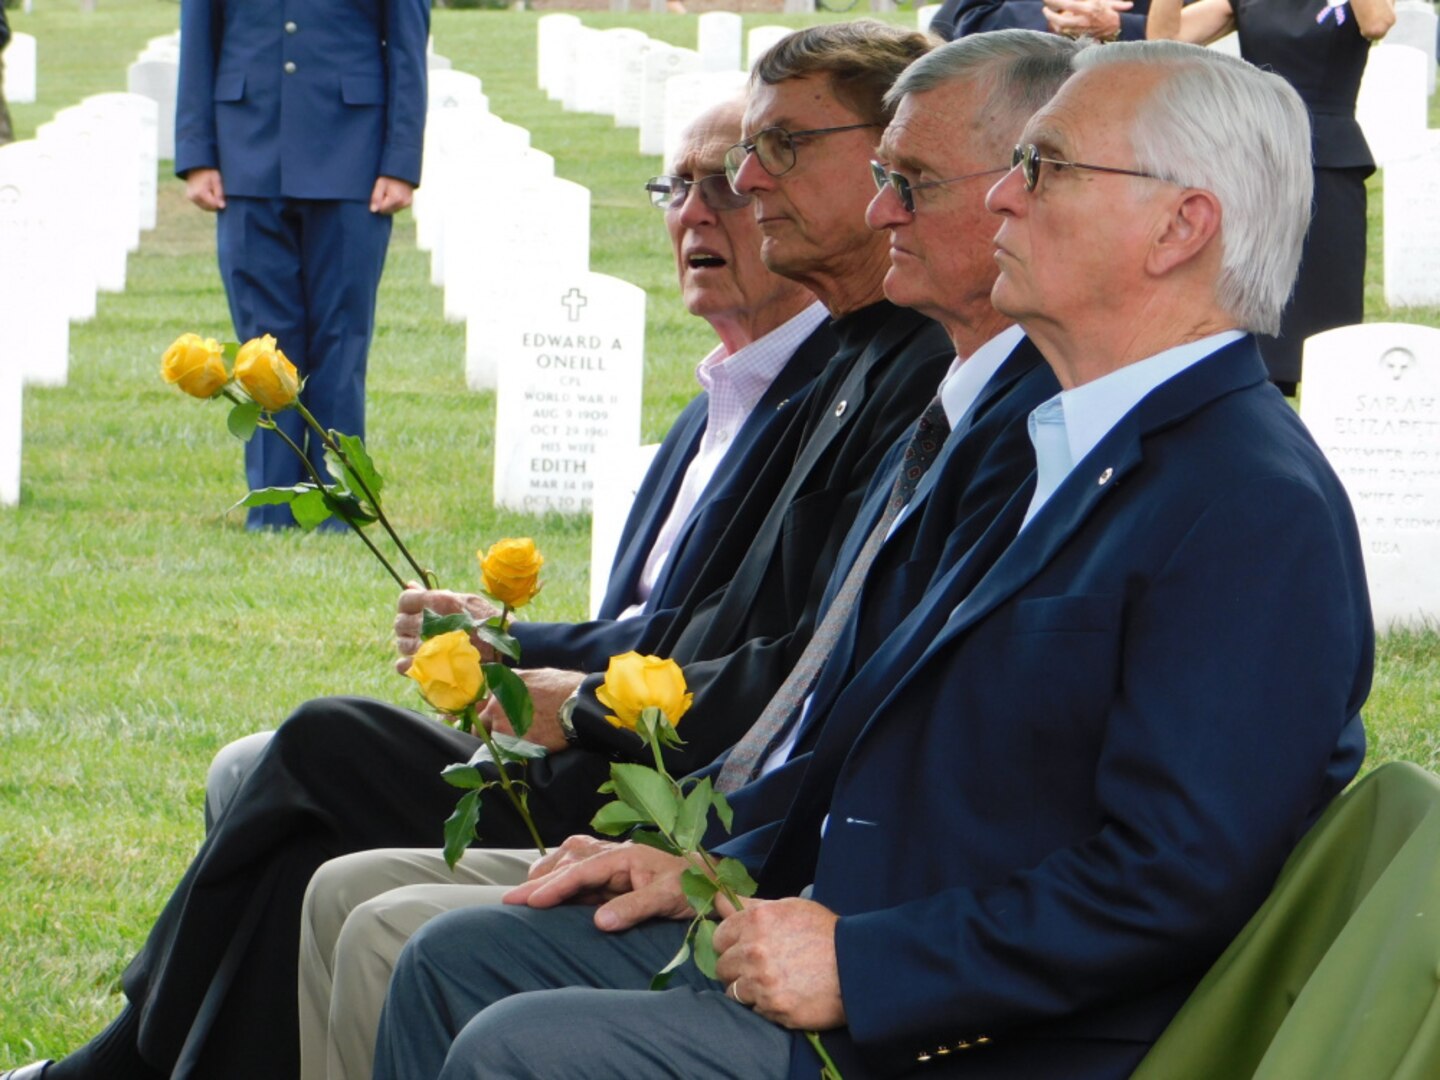 The four sons of Major Harvey Storms listen to a graveside service for their father who was buried in Arlington National Cemetery on July 16, 2021. Major Storms was reported missing in action on Dec. 1, 1950, when his unit was attacked by enemy forces near the Chosin Reservoir, North Korea. Following the battle, his remains could not be recovered. The Defense POW/MIA Accounting Agency was able to identify the remains in 2019. (Defense Photo by Ashley M. Wright)